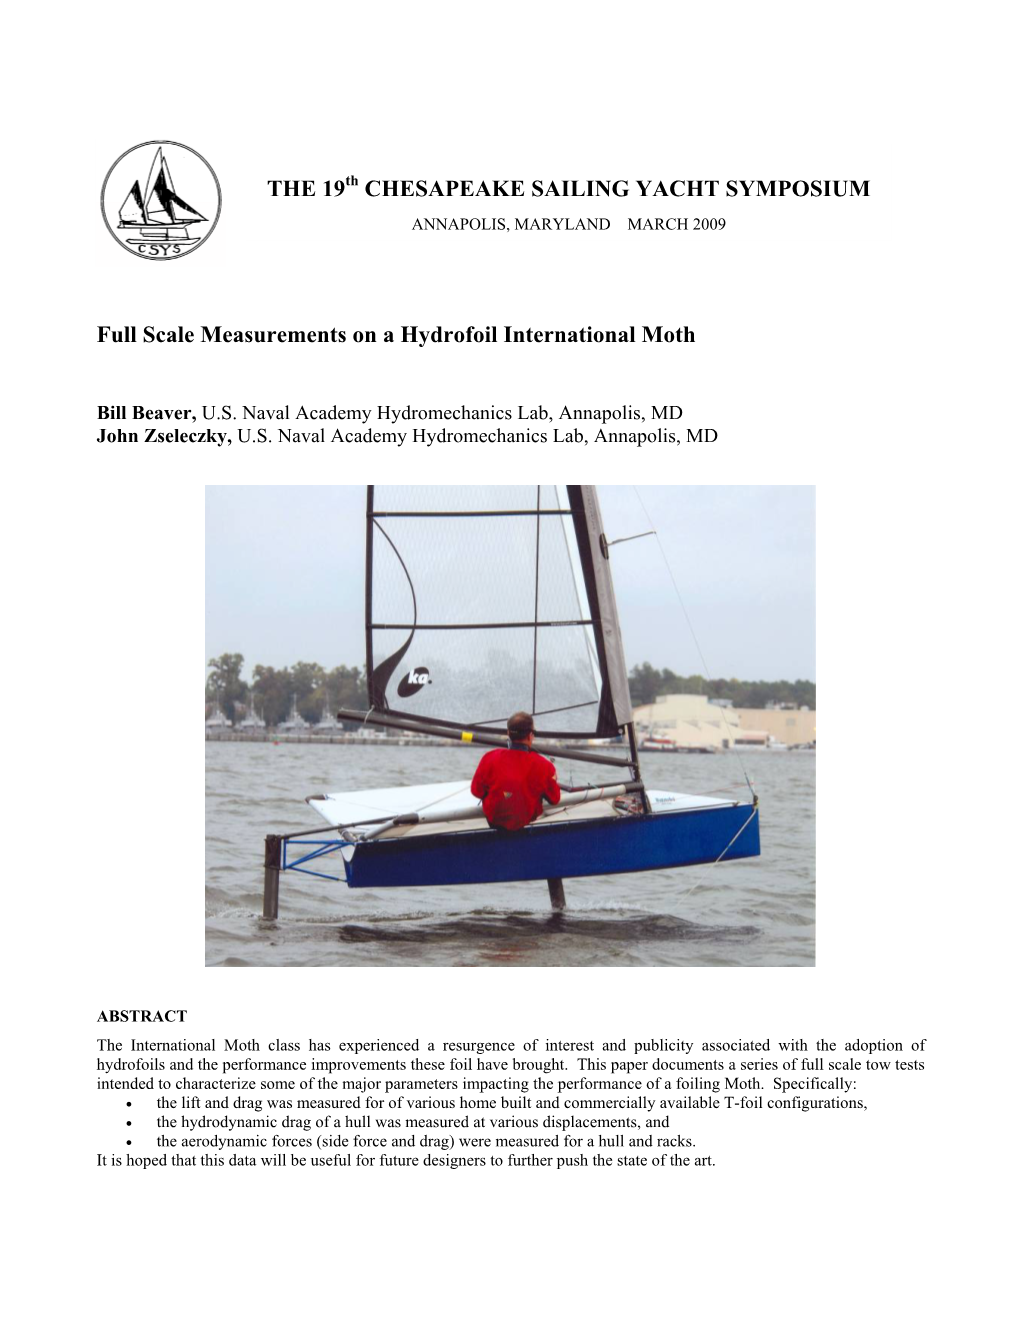 Full Scale Measurements on a Hydrofoil International Moth